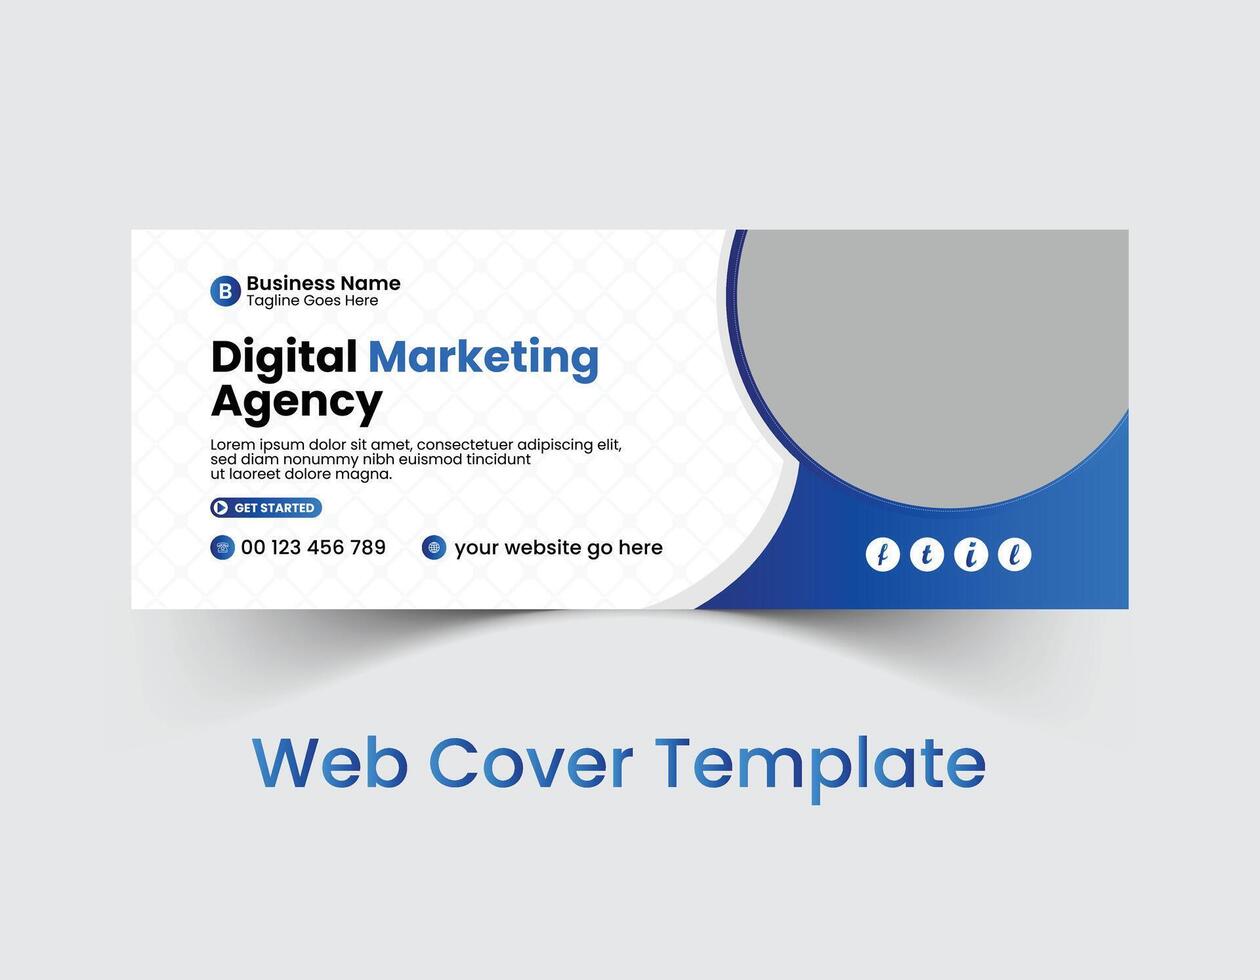 Professional corporate business social cover template design and web banner template design with creative, eye catching, professional and modern colorful layout vector